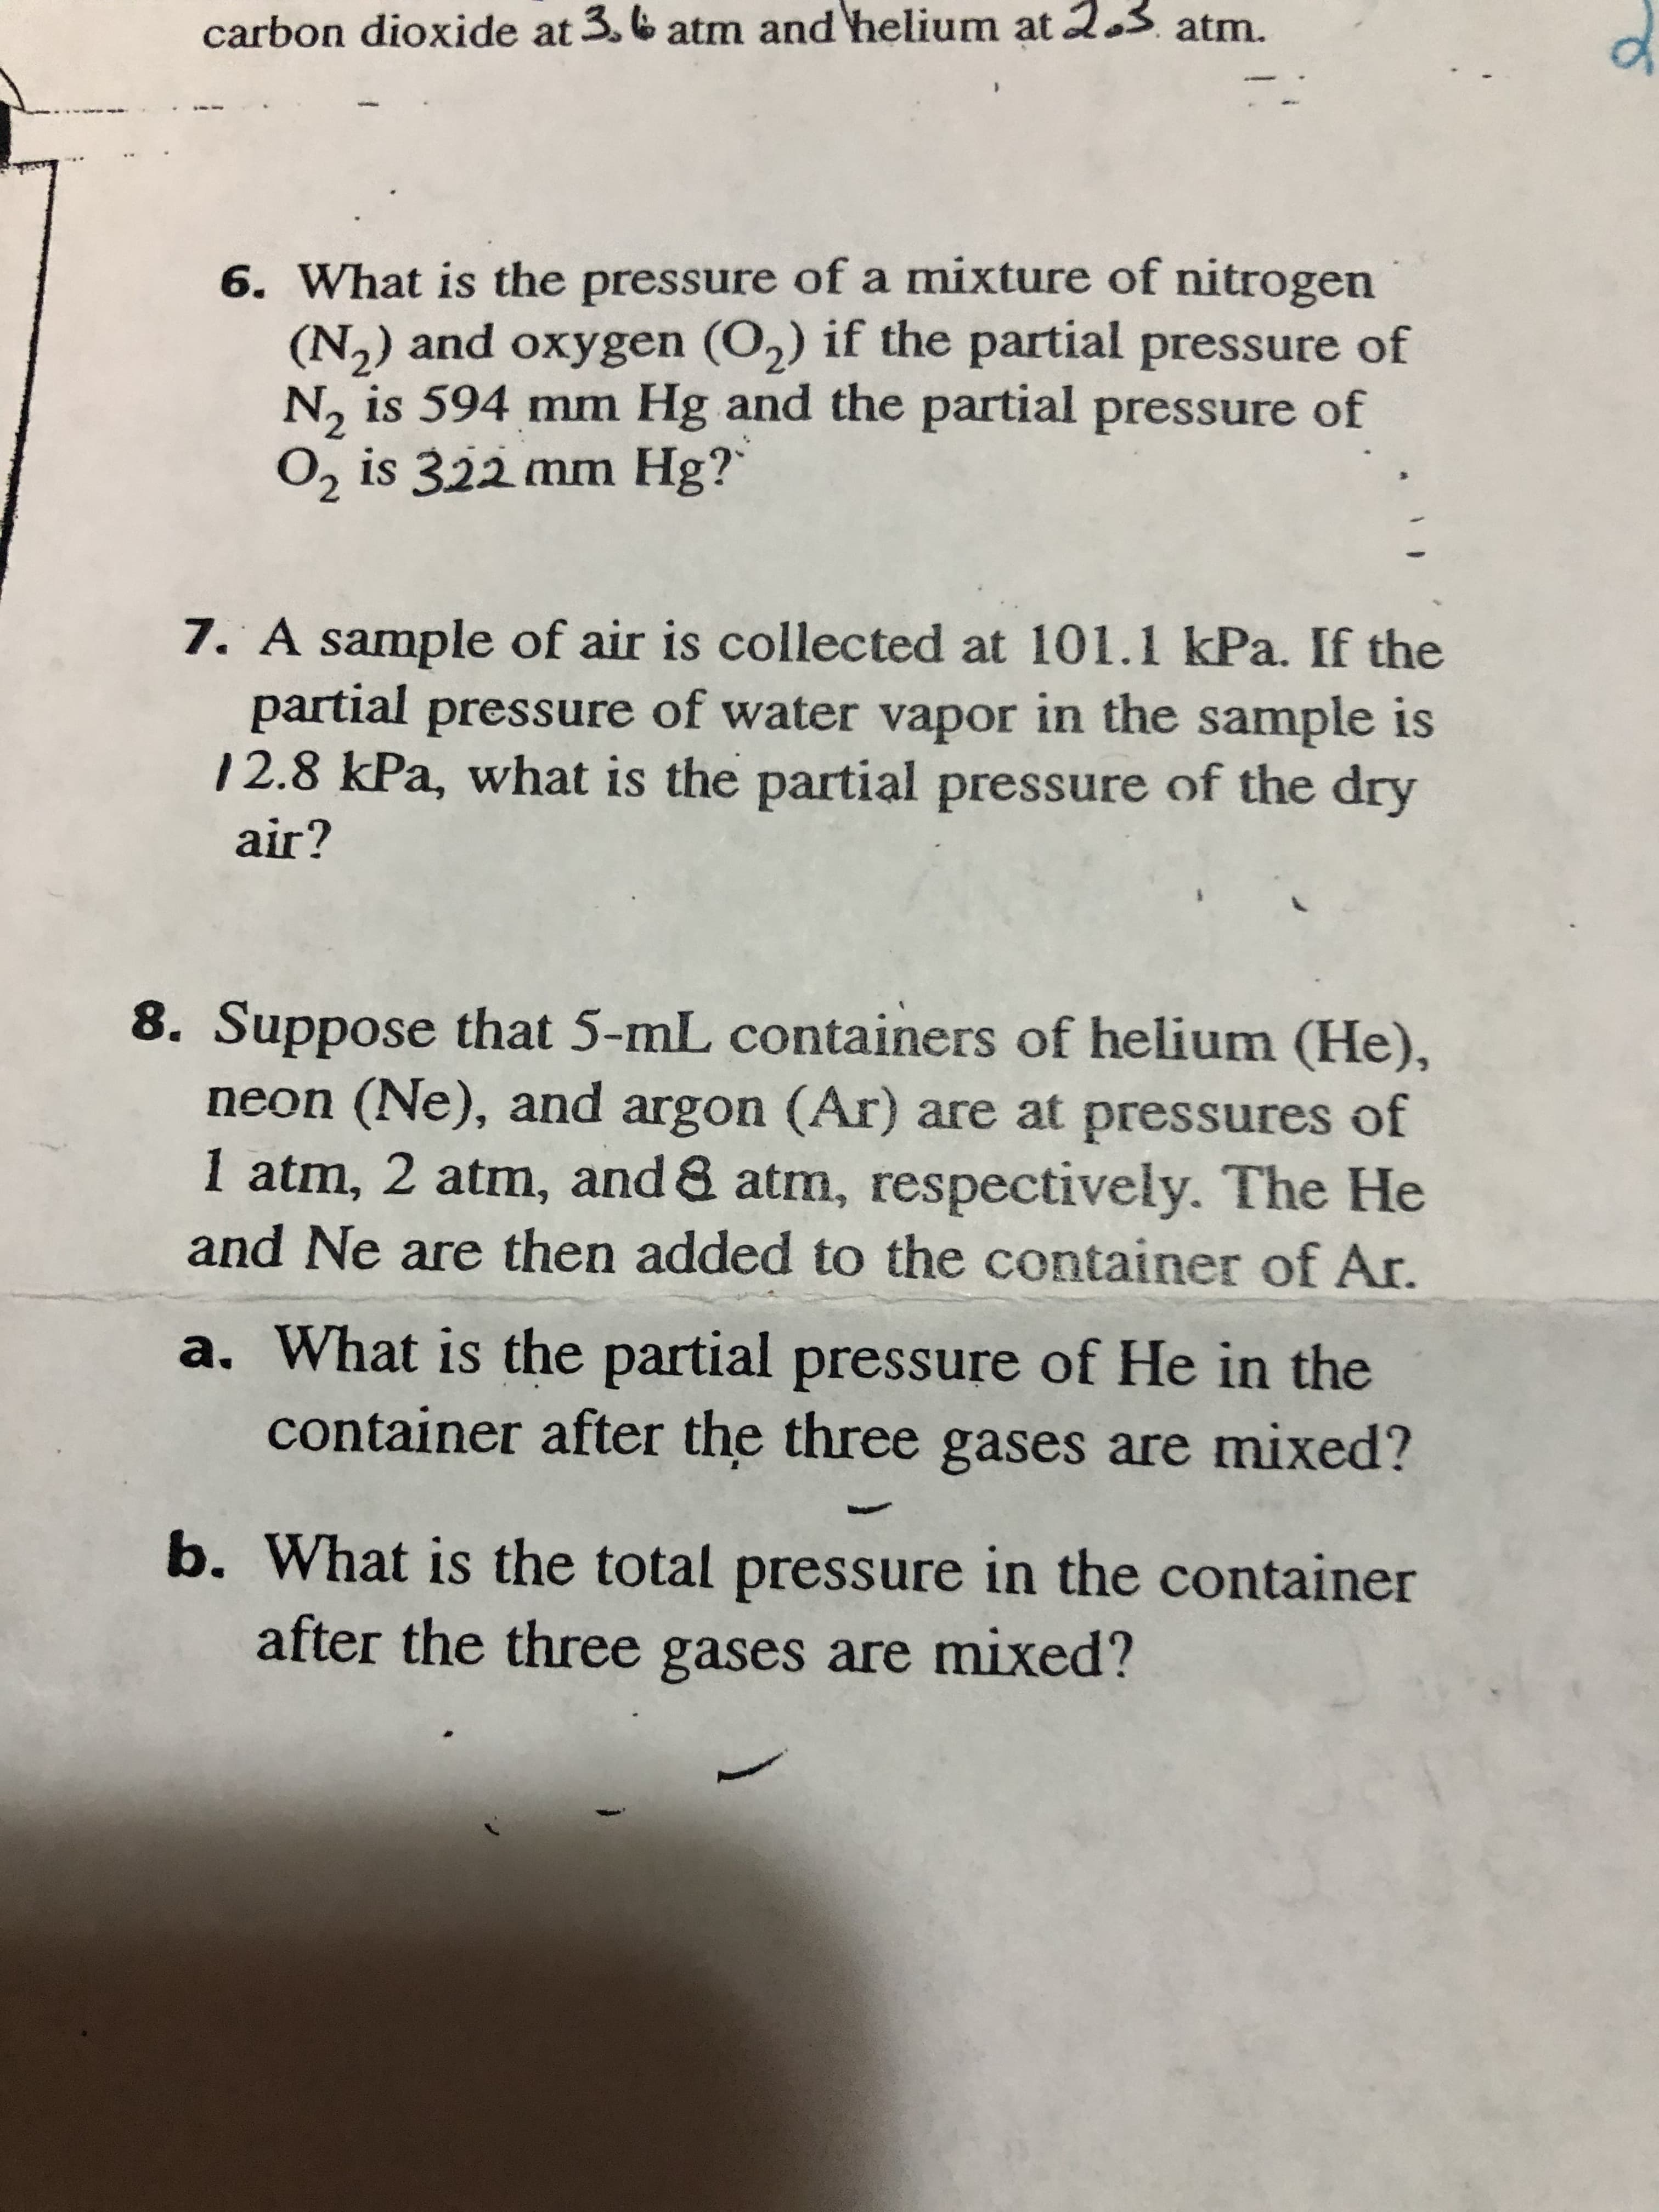 carbon dioxide at 3. & atm and helium at 2.3 atm.
of
6. What is the pressure of a mixture of nitrogen
(N,) and oxygen (O,) if the partial pressure of
N, is 594 mm Hg and the partial pressure of
O, is 322 mm Hg?`
7. A sample of air is collected at 101.1 kPa. If the
partial pressure of water vapor in the sample is
12.8 kPa, what is the partial pressure of the dry
air?
8. Suppose that 5-mL containers of helium (He),
neon (Ne), and argon (Ar) are at pressures of
1 atm, 2 atm, and & atm, respectively. The He
and Ne are then added to the container of Ar.
a. What is the partial pressure of He in the
container after the three gases are mixed?
b. What is the total pressure in the container
after the three gases are mixed?
